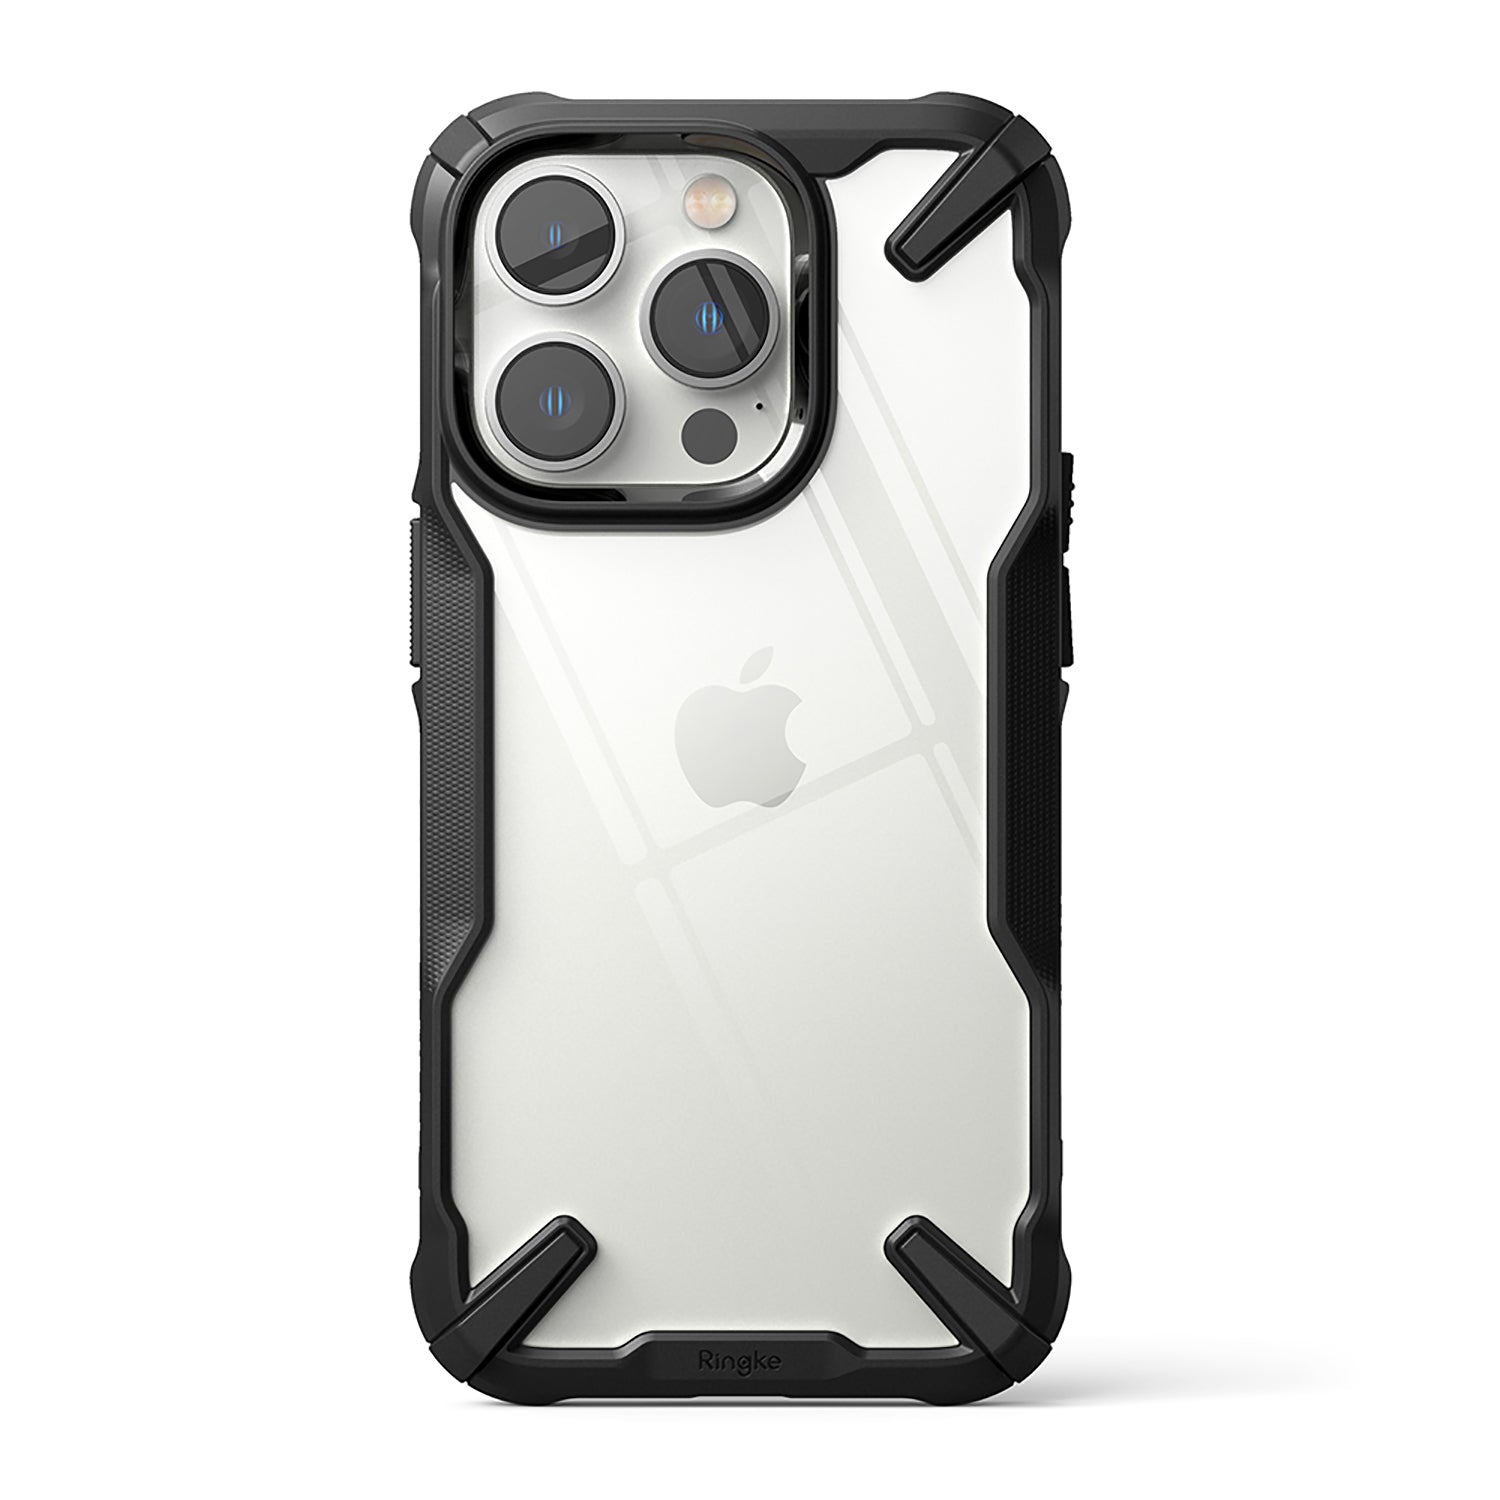 Ringke Fusion X Case for iPhone 14 Series Mobile Phone Cases Ringke iPhone 14 Pro 6.1" 